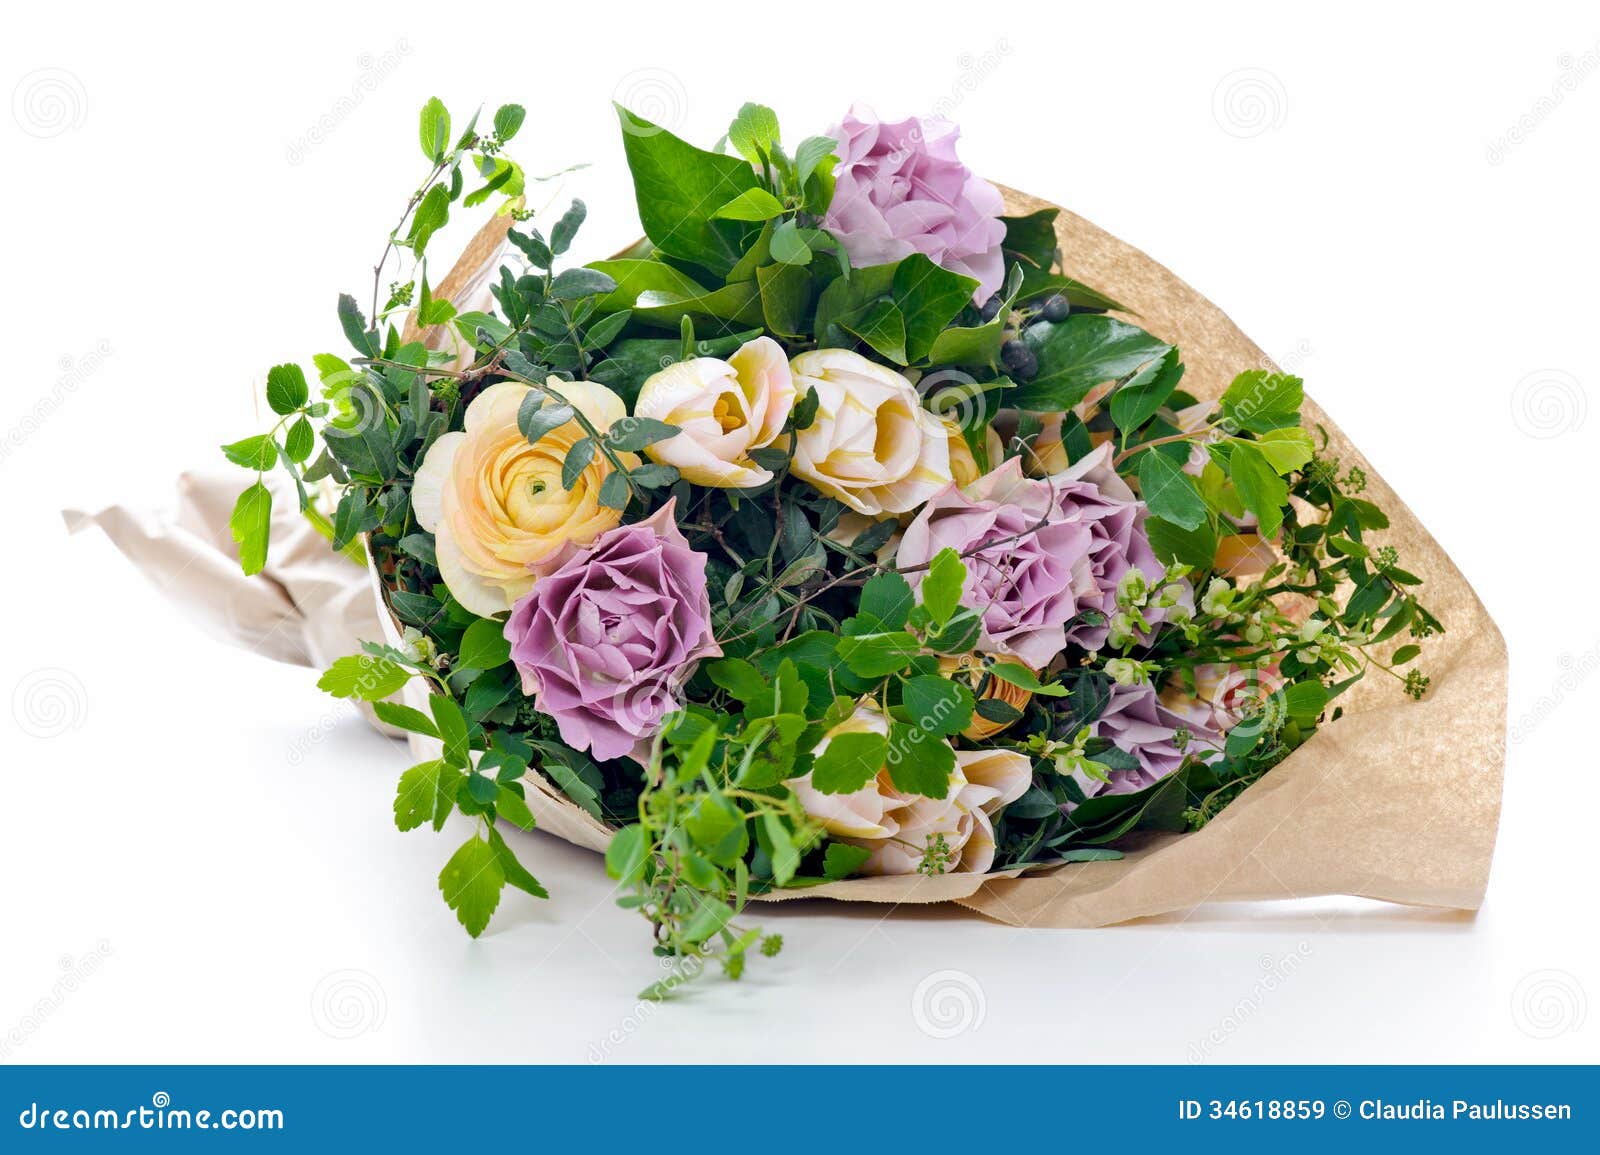 bunch flowers white background 34618859